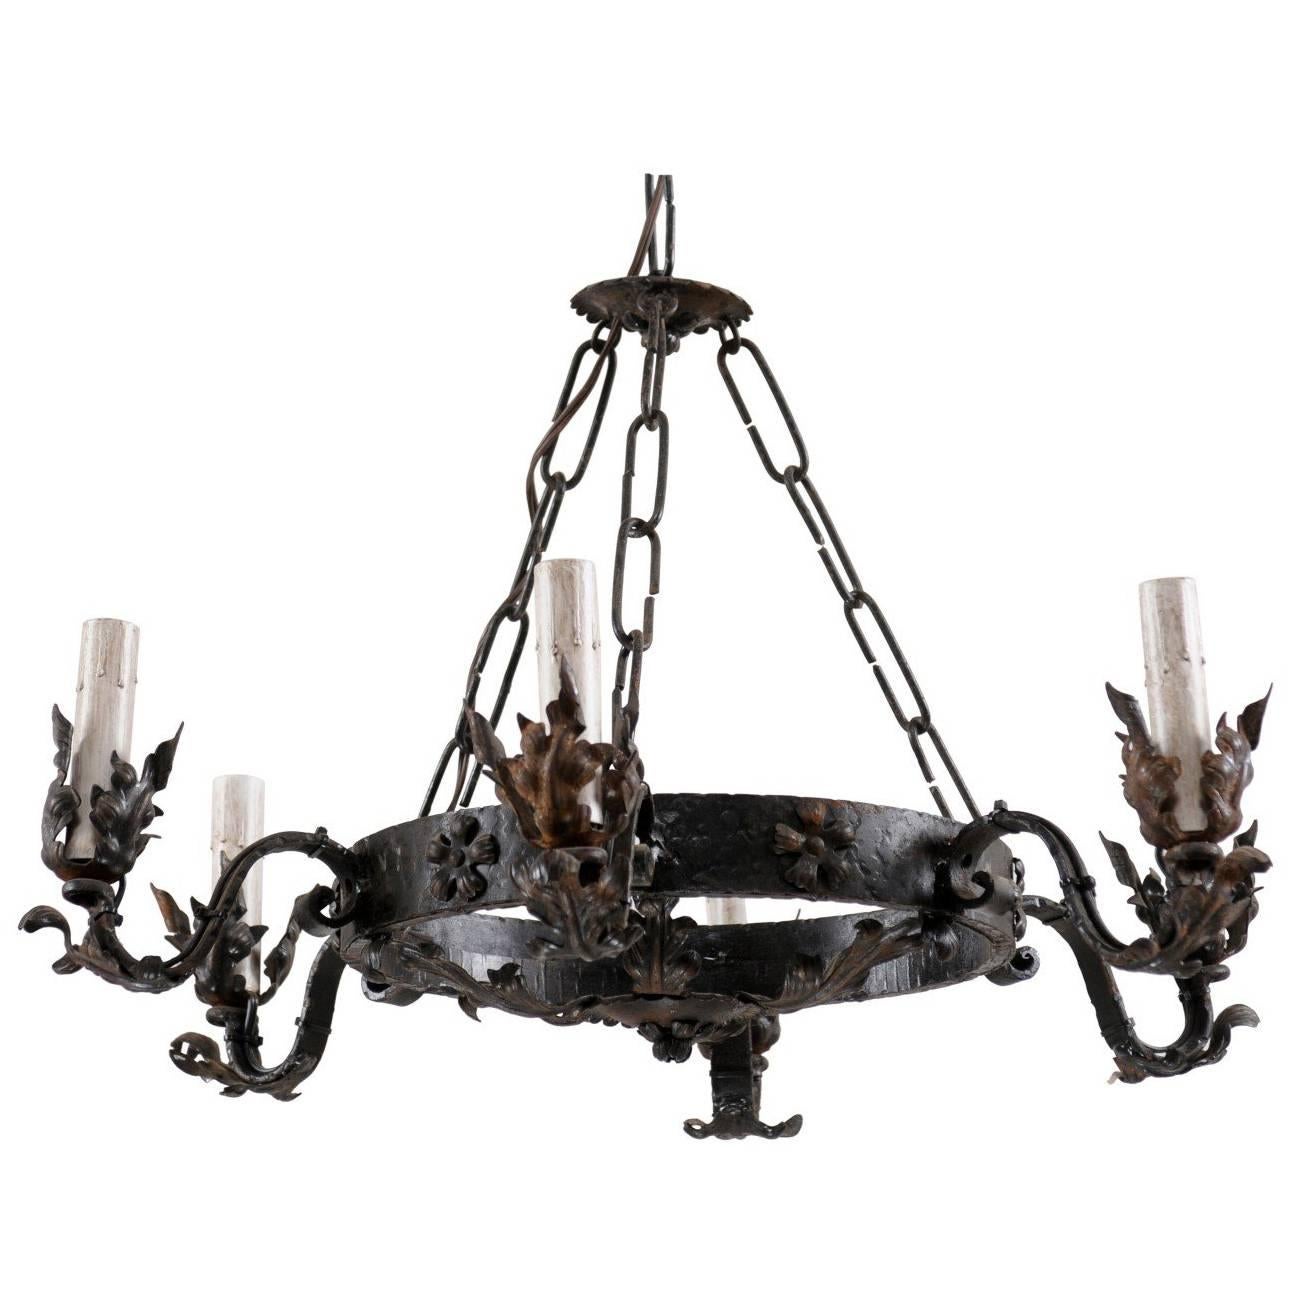 Mid-20th Century Ring Shaped Dark Iron Chandelier with Floral and Leaf Motifs